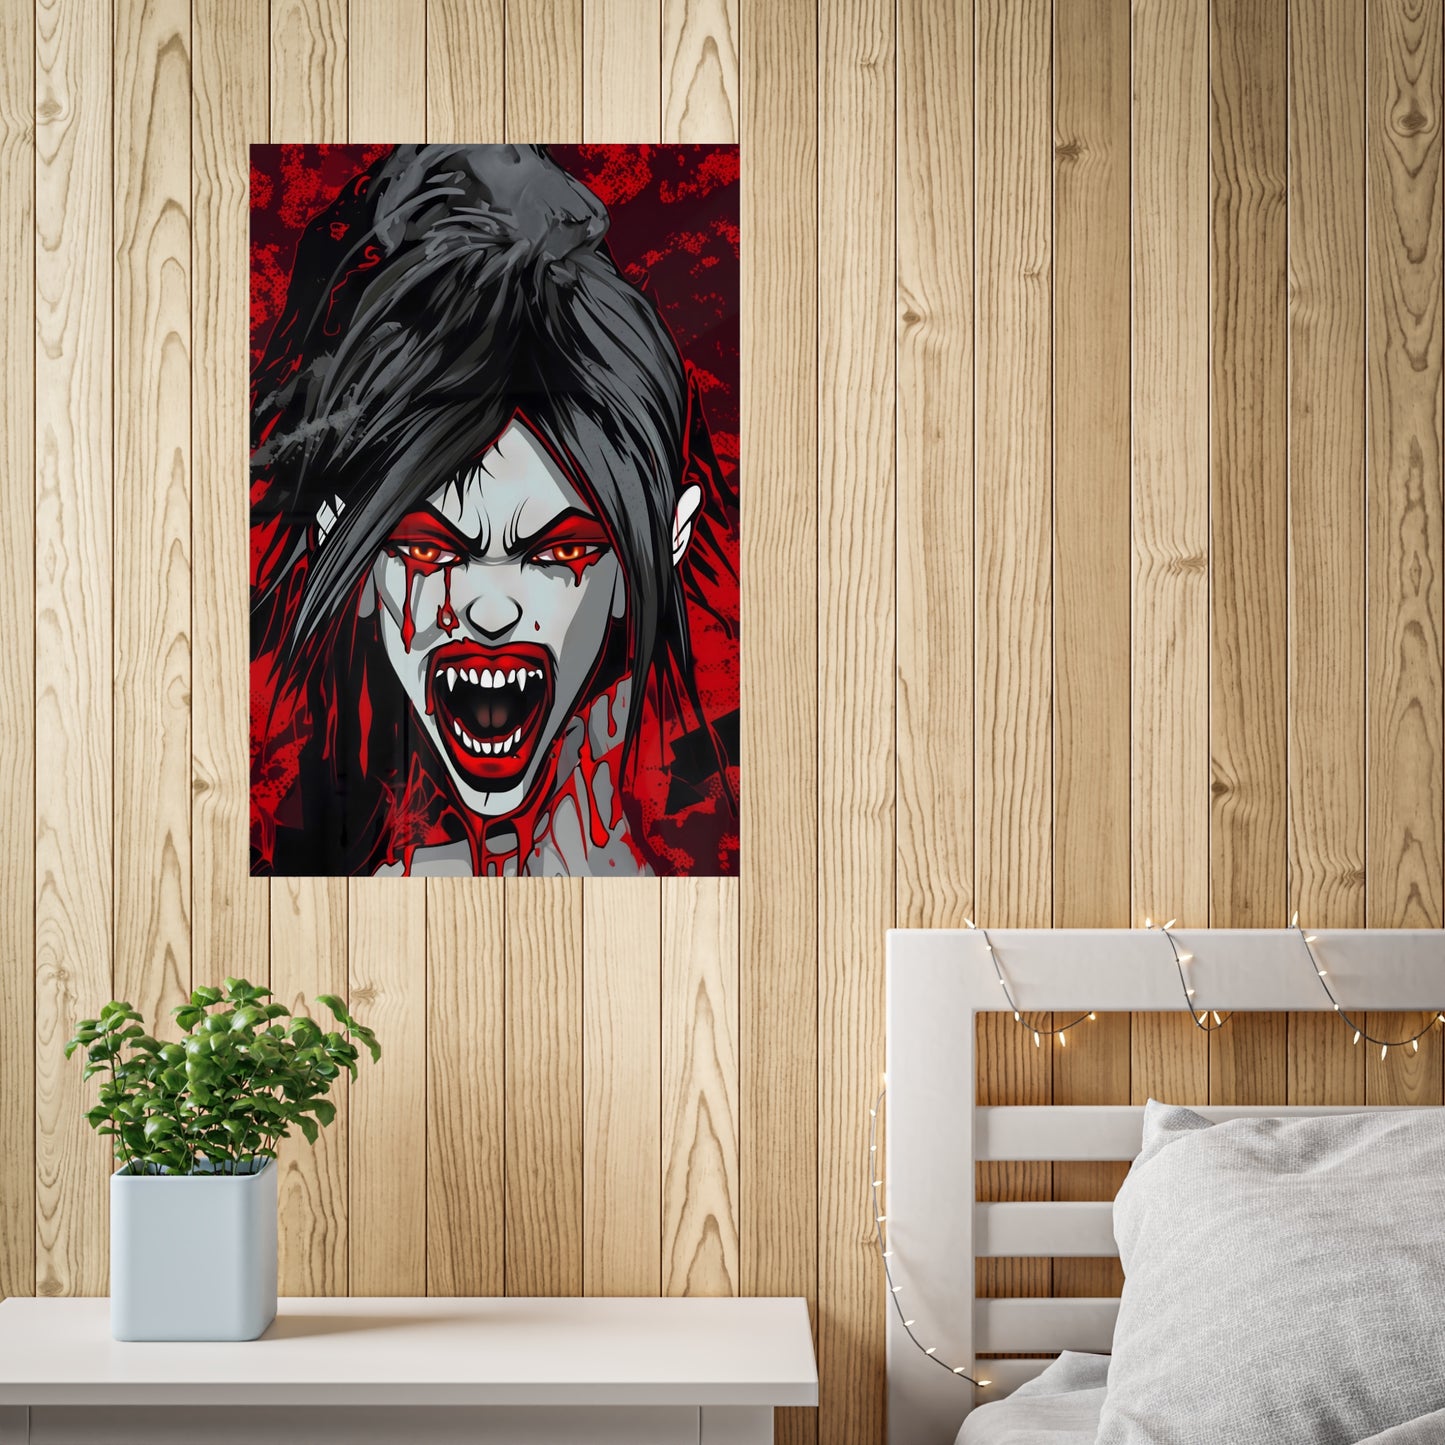 Vexalia the Bloodthirsty Poster